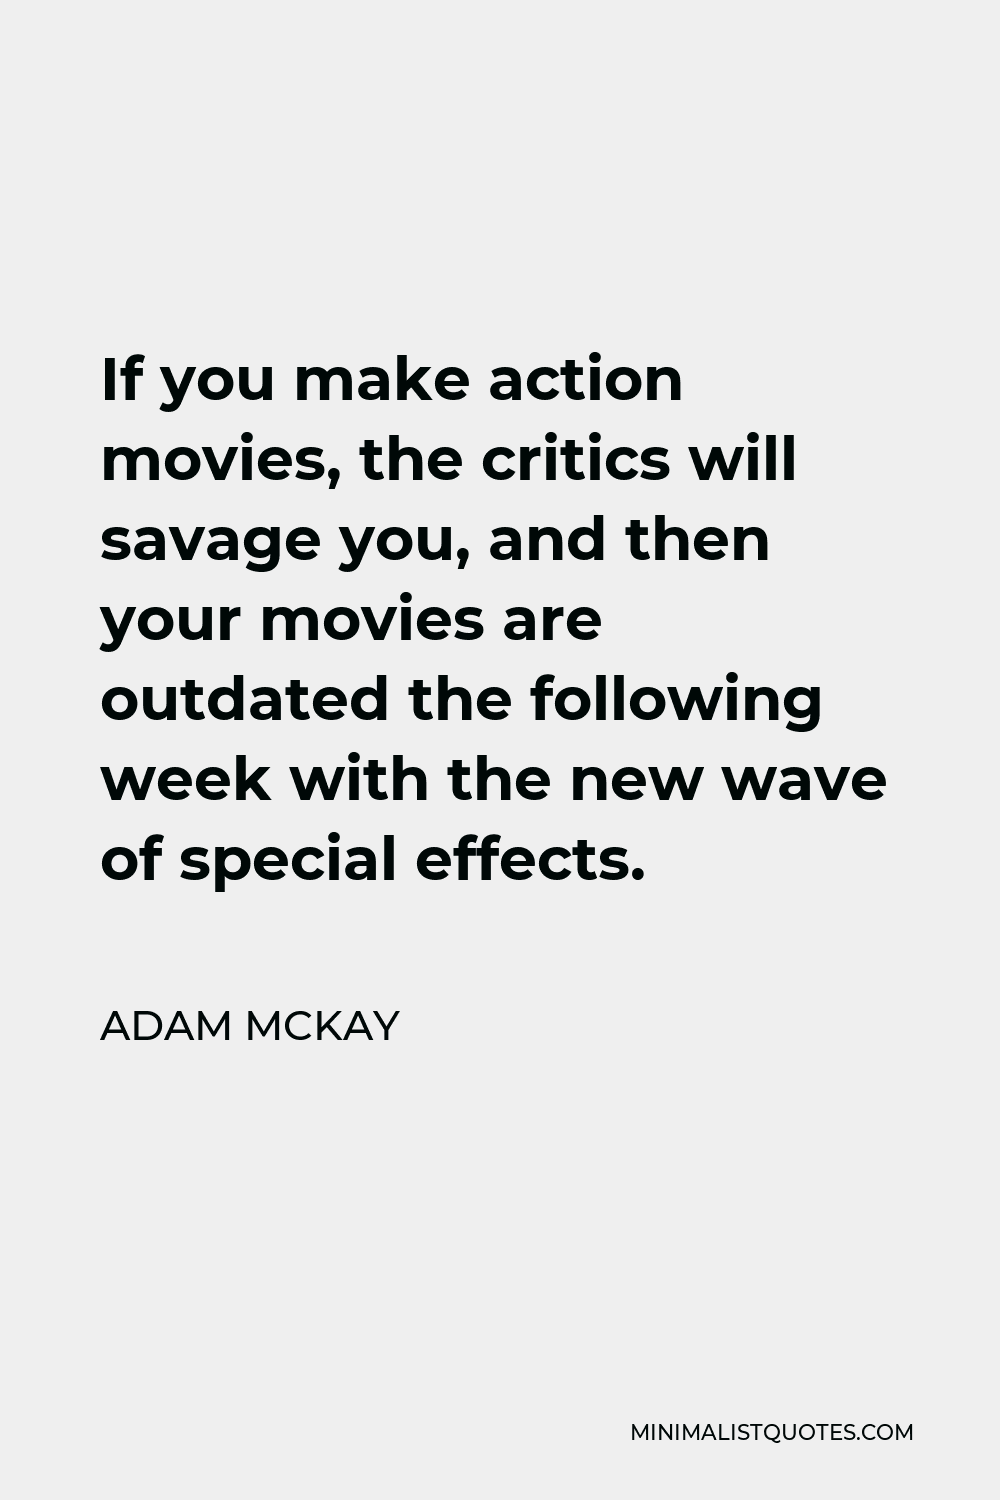 Adam McKay Quote - If you make action movies, the critics will savage you, and then your movies are outdated the following week with the new wave of special effects.